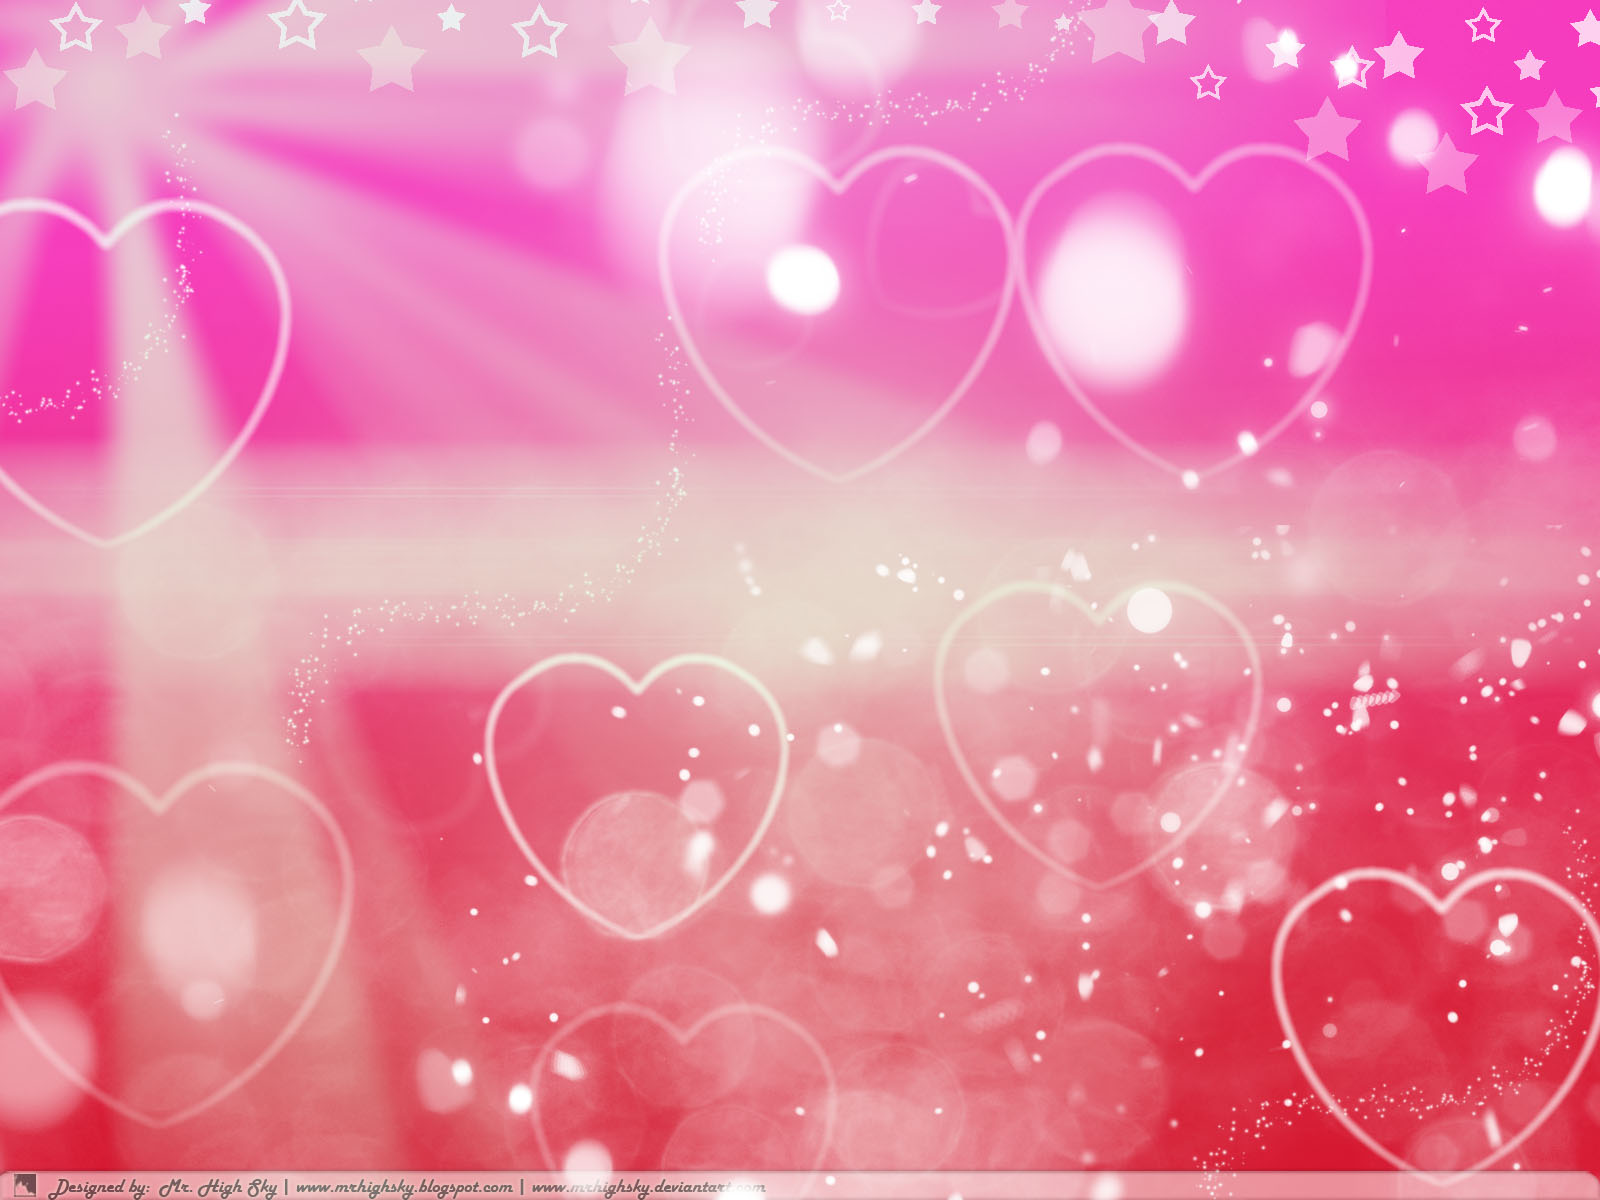 17 Love Vector Wallpapers Images